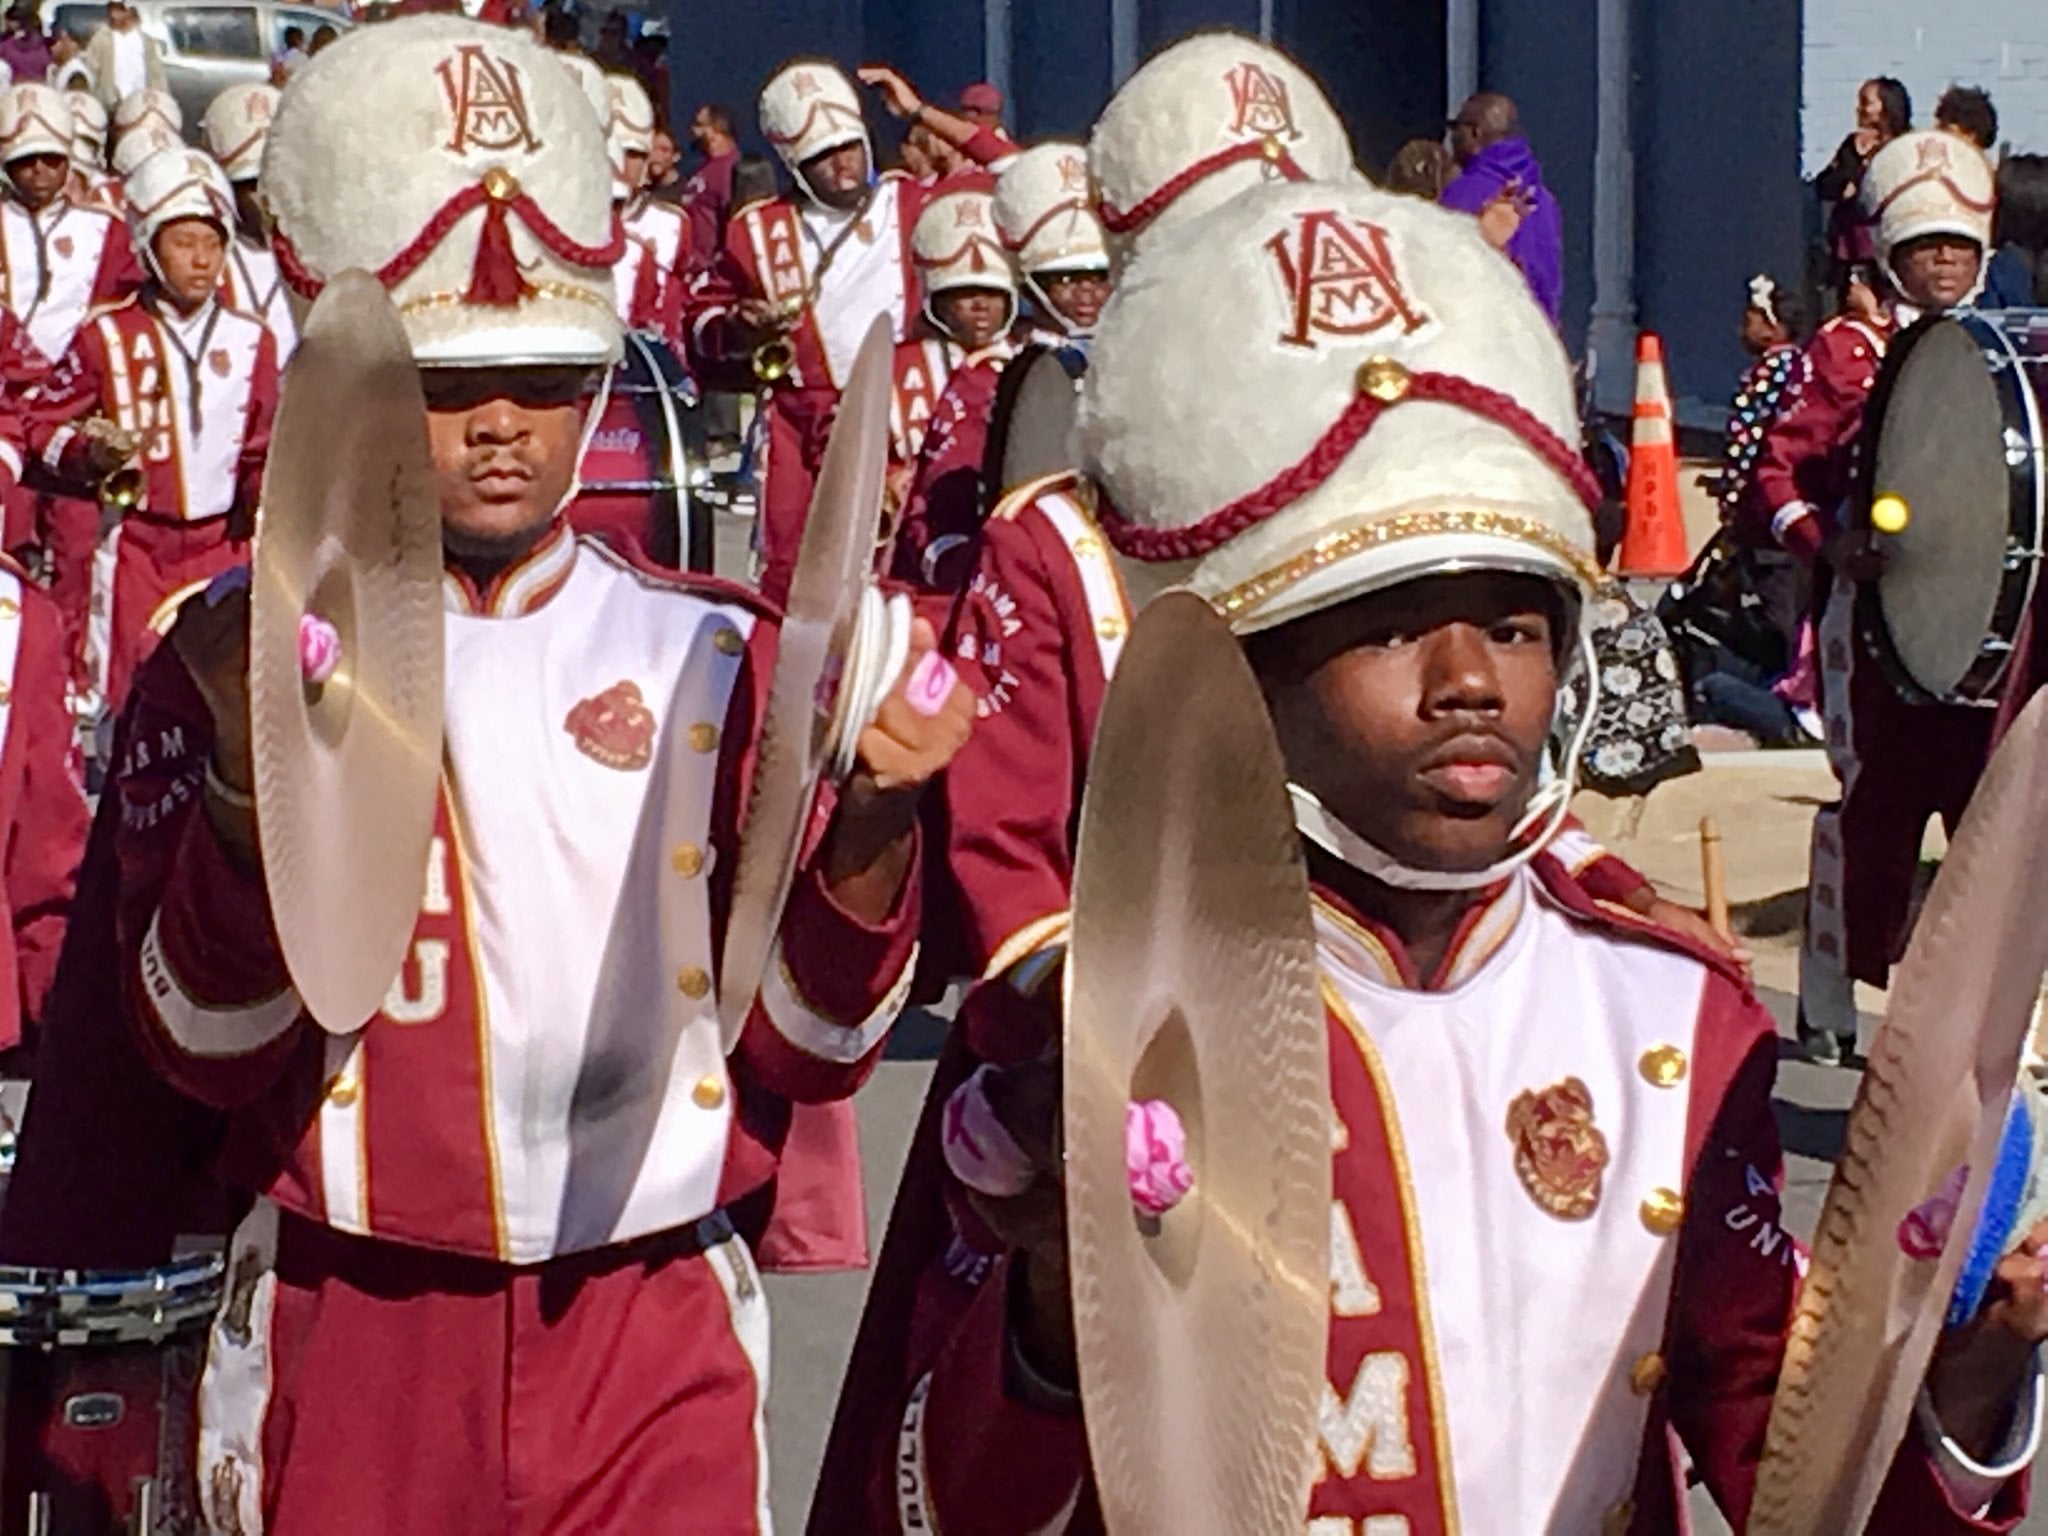 Here’s Your Ultimate Guide To HBCU Homecoming Season This October